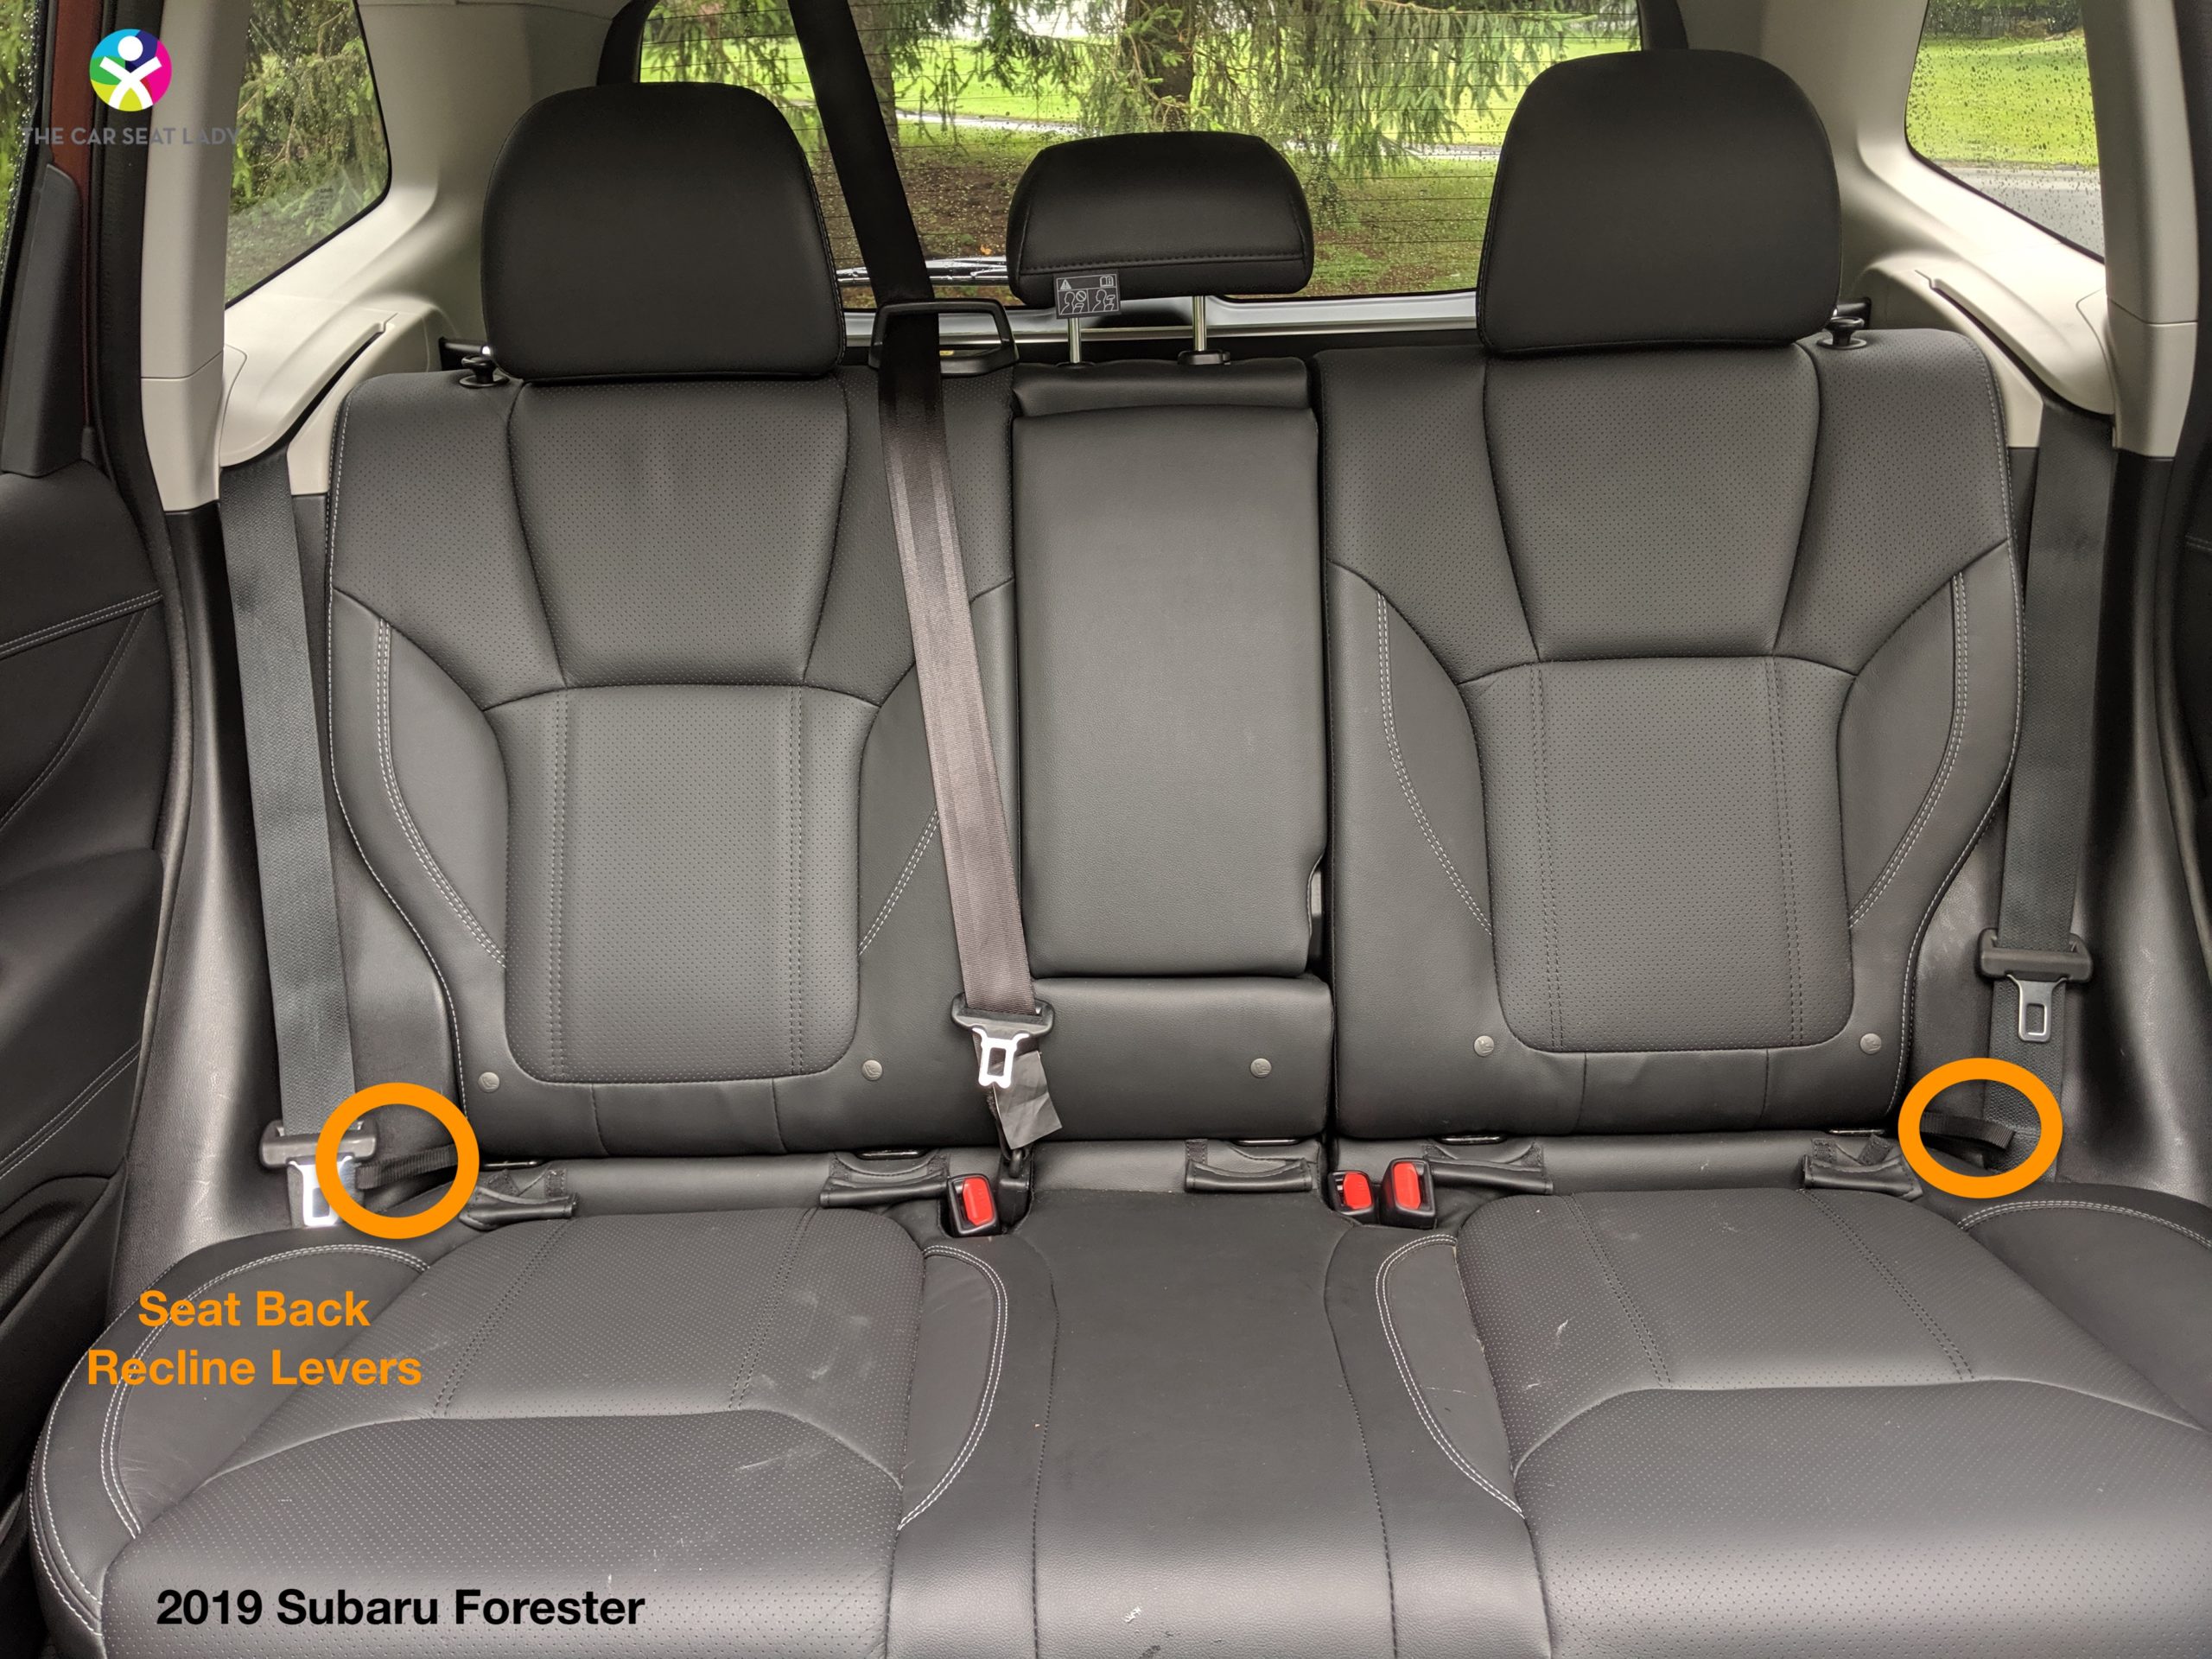 https://thecarseatlady.com/wp-content/uploads/2020/03/2019-Subaru-Forester-frontal-scaled.jpg